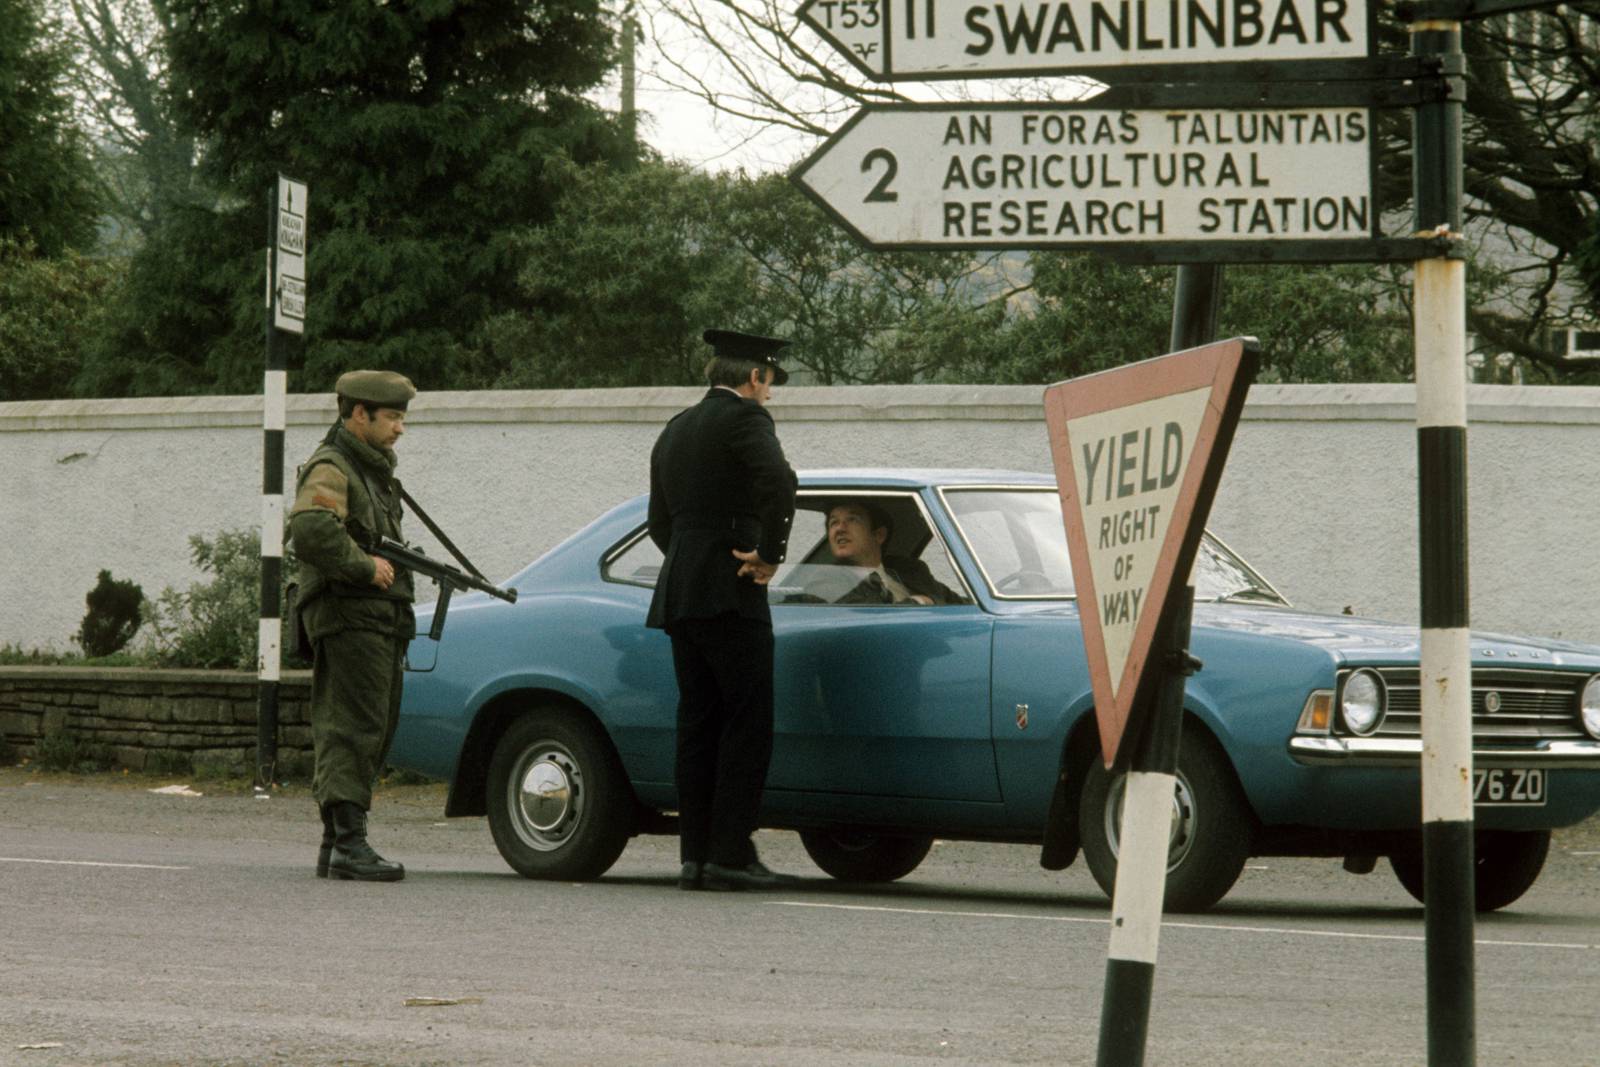 File photo dated 01/04/1974 of police and military checking cars at a border post in Swanlinbar in the Irish Republic, just south of the Ulster border. PRESS ASSOCIATION Photo. Issue date: Saturday January 26, 2019. Hundreds of protesters have warned Theresa May that a return to a hard Irish border risks destroying Northern Ireland's hard-won peace. See PA story POLITICS Brexit Border. Photo credit should read: PA Images/PA Wire